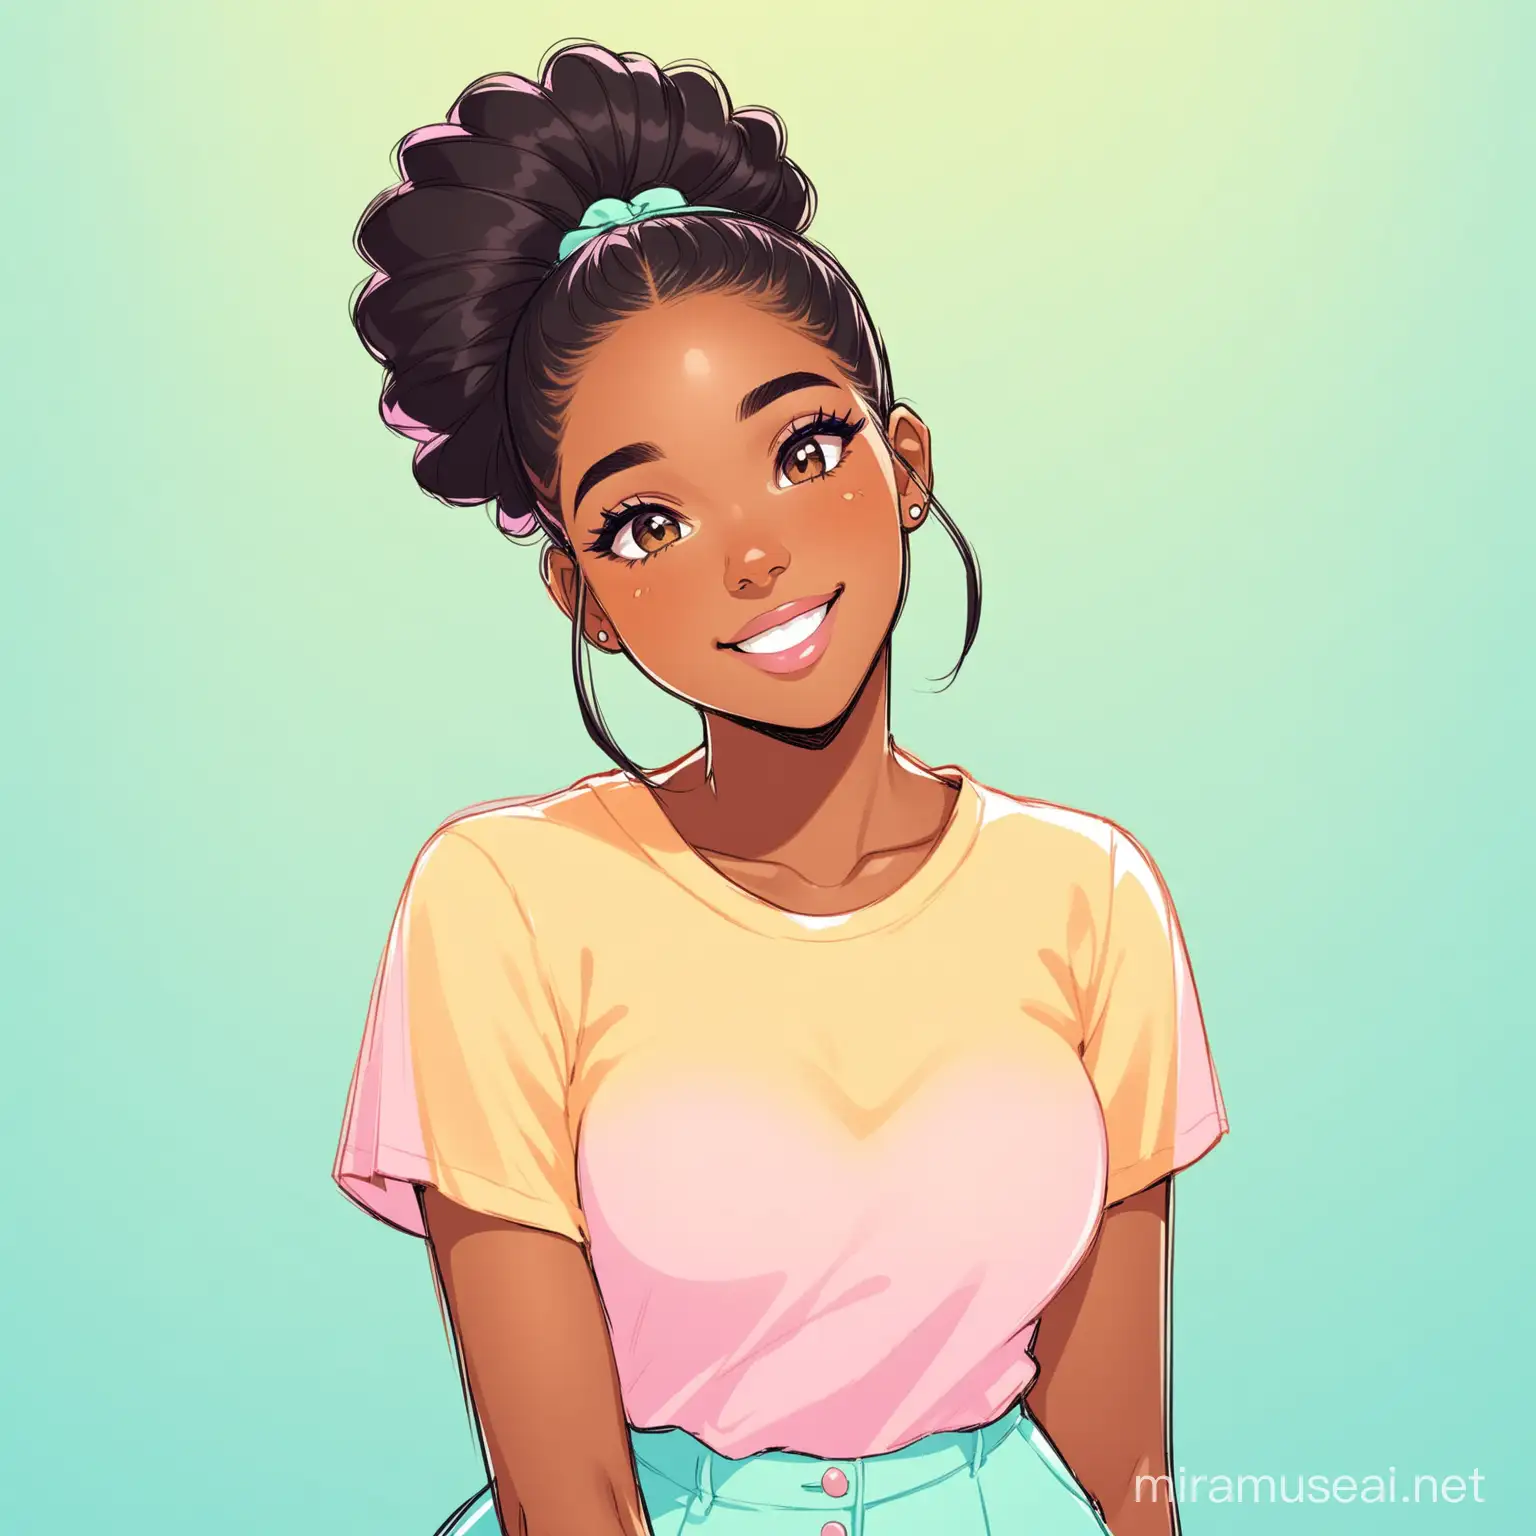 A beautiful black American young lady, in her late 20s, smiling, as a cartoon character in pastel colours